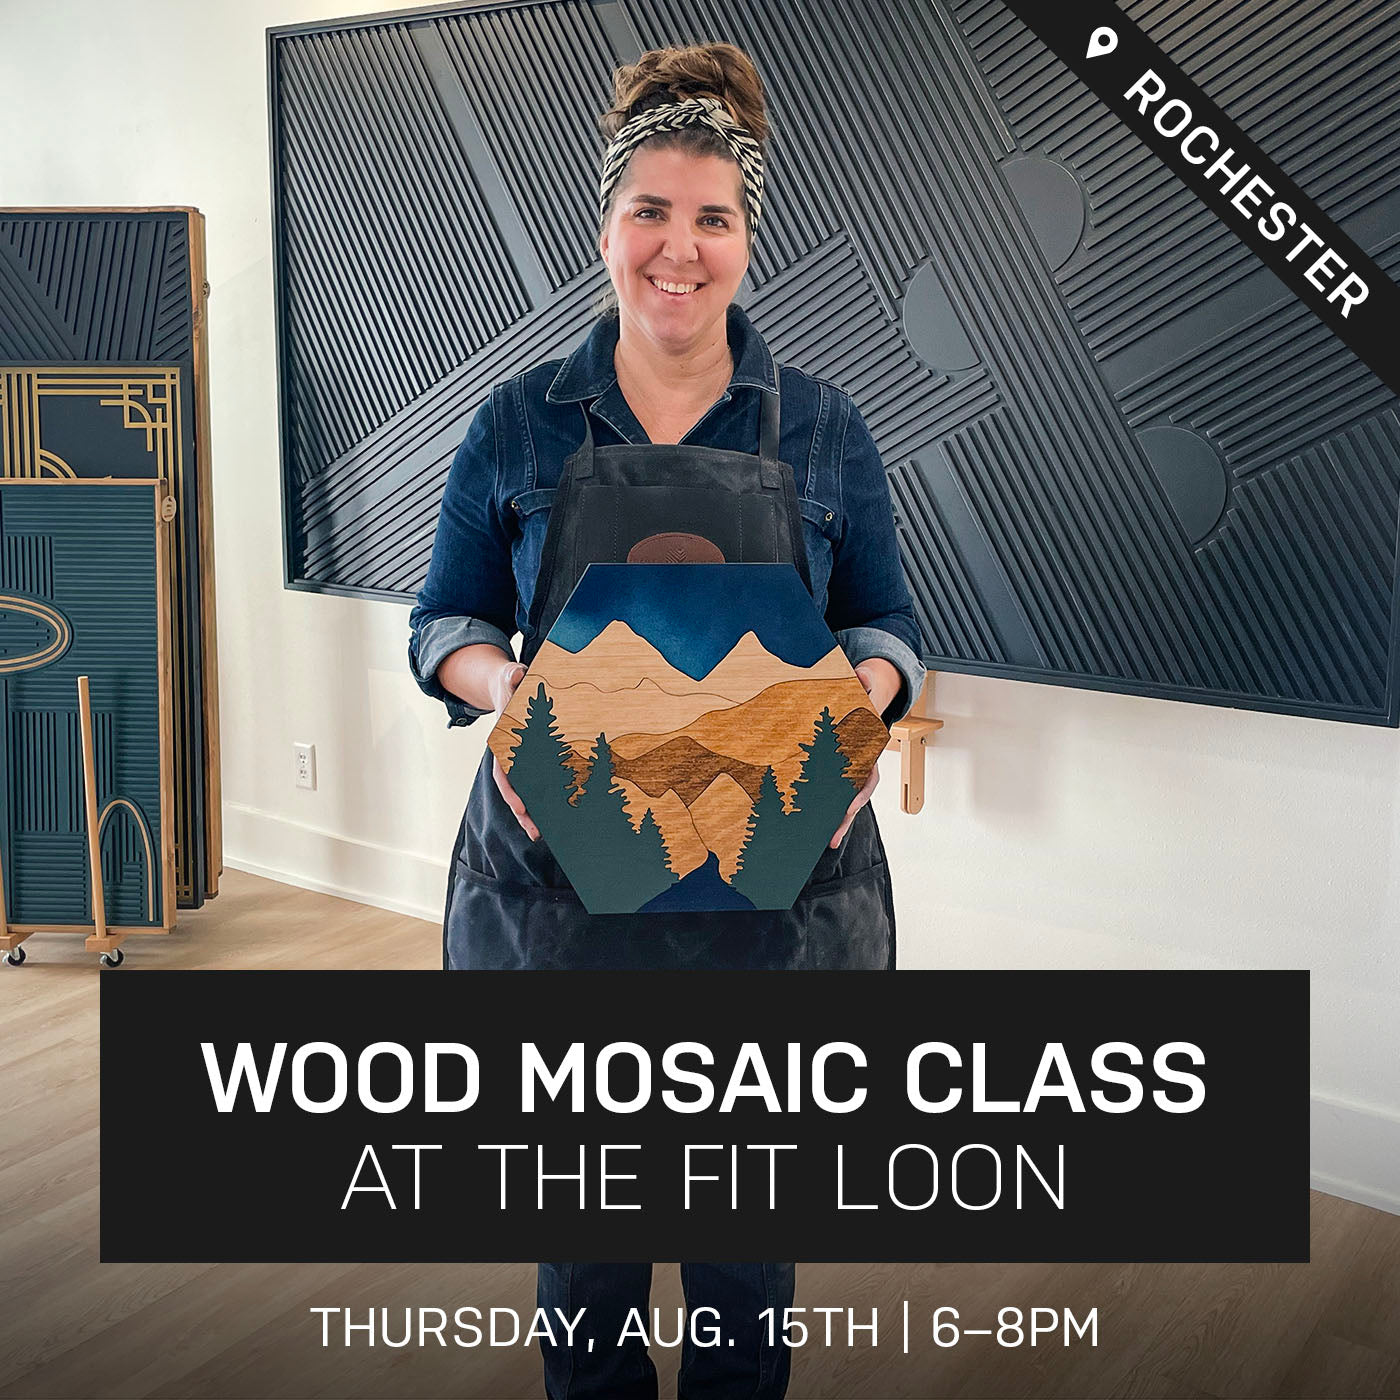 Venture Wood Mosaic Class at The Fit Loon | Aug. 15th @ 6pm